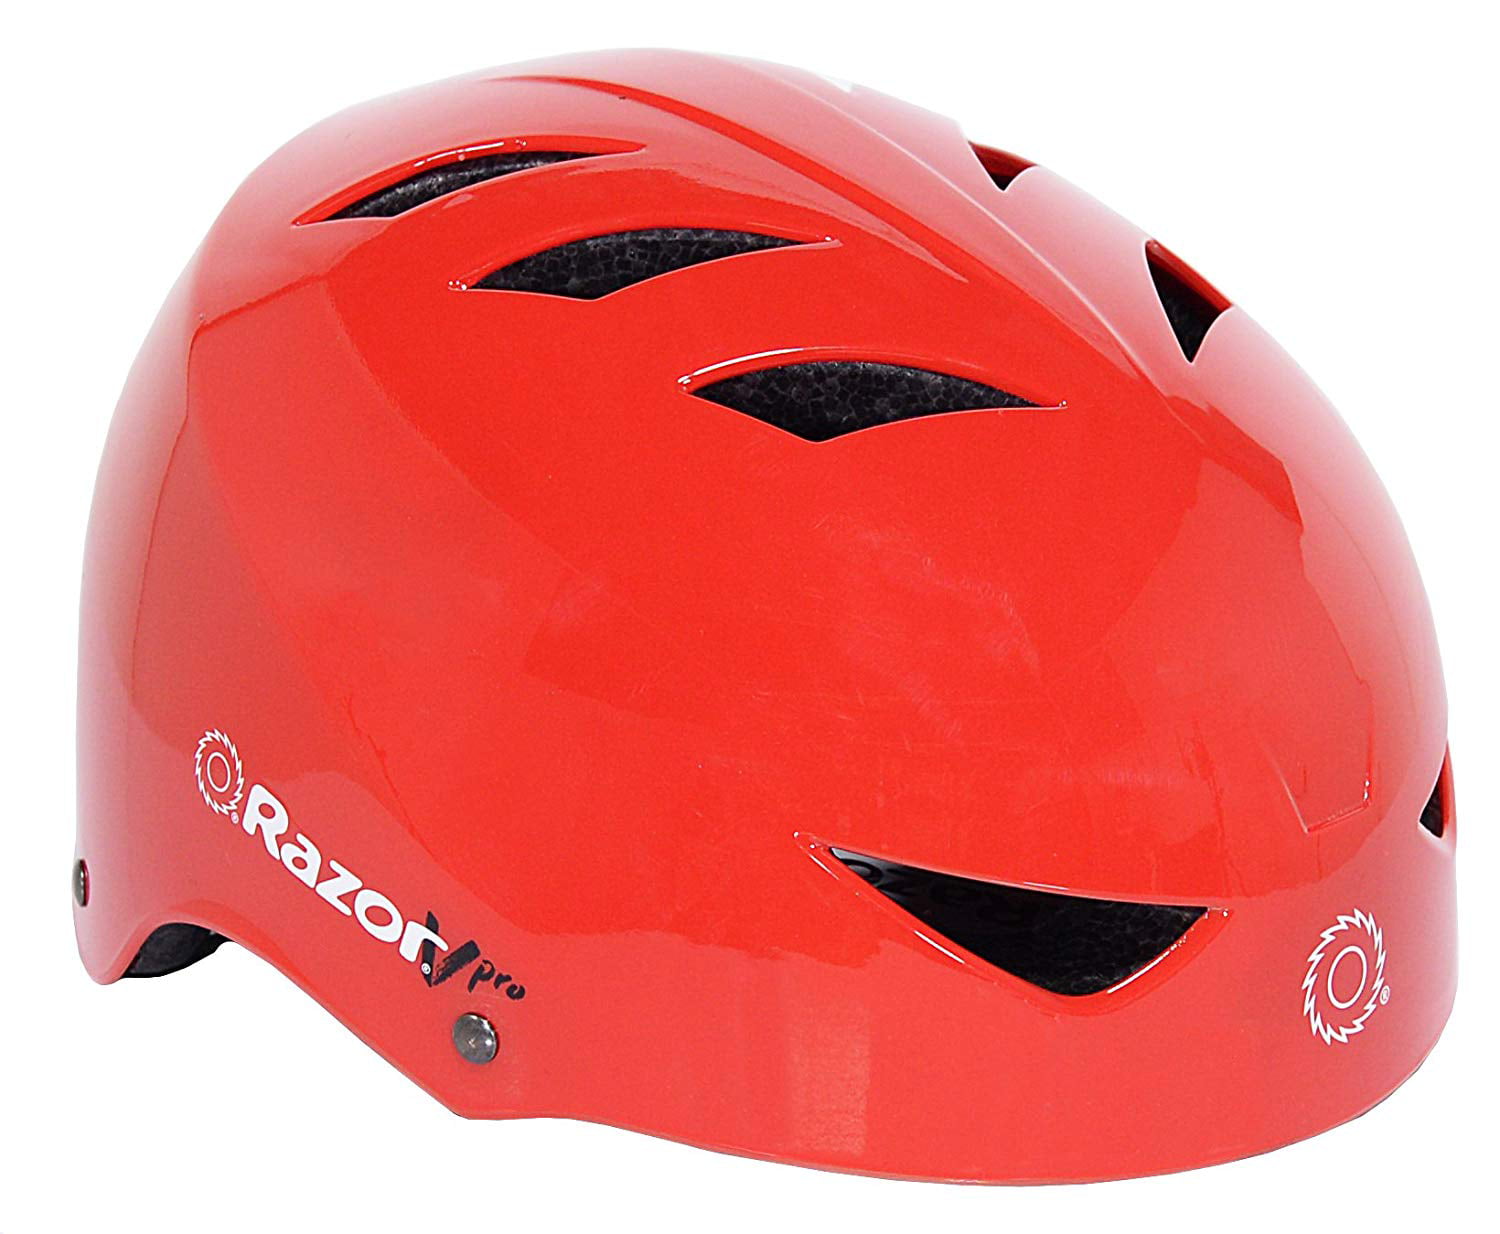 Razor VPro Multi-Sport Youth Helmet with No-Pinch Magnetic Buckle 